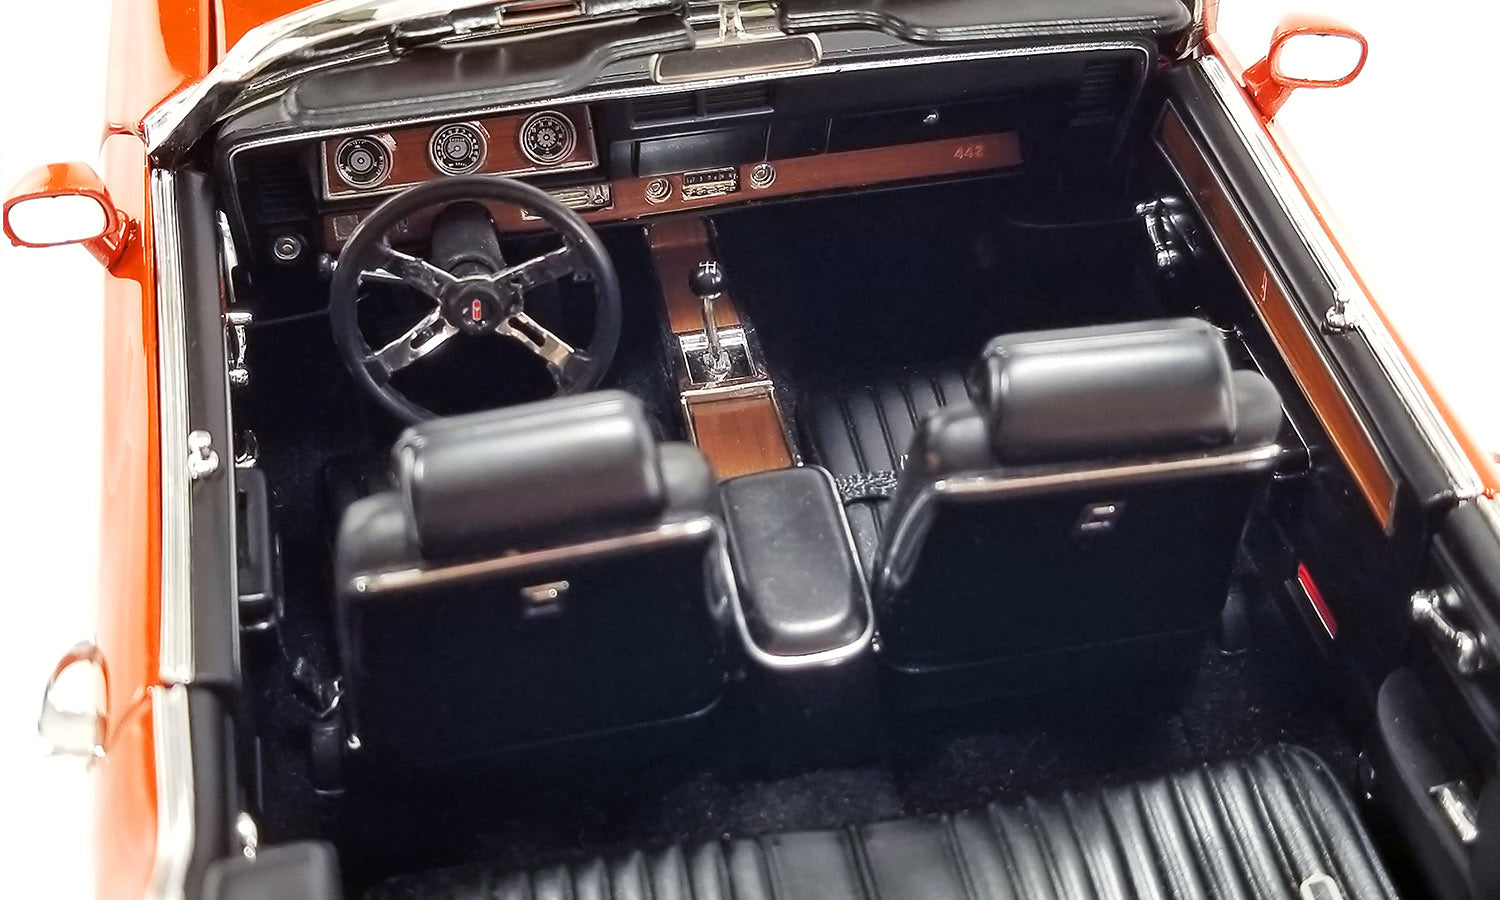 Interior detail includes dash instruments, radio, seat belts, and more!